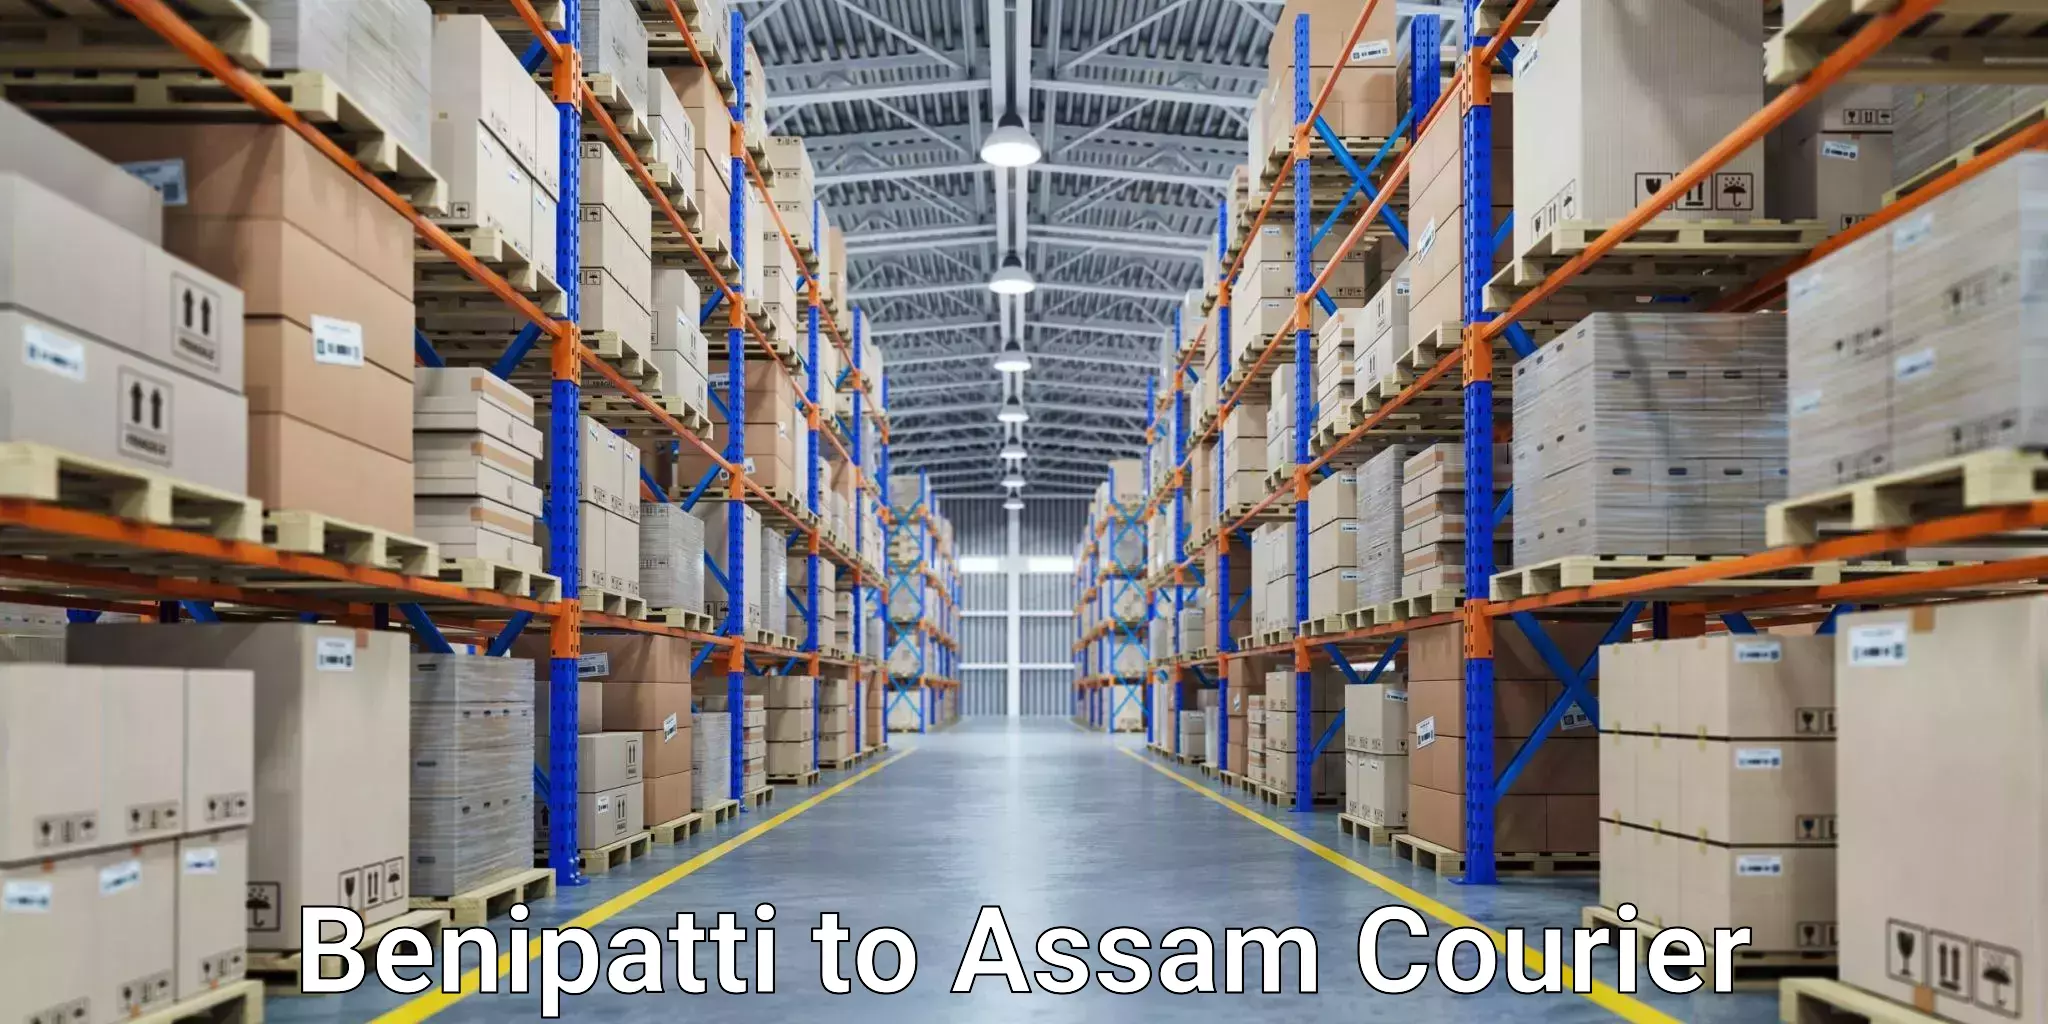 Nationwide delivery network Benipatti to Assam